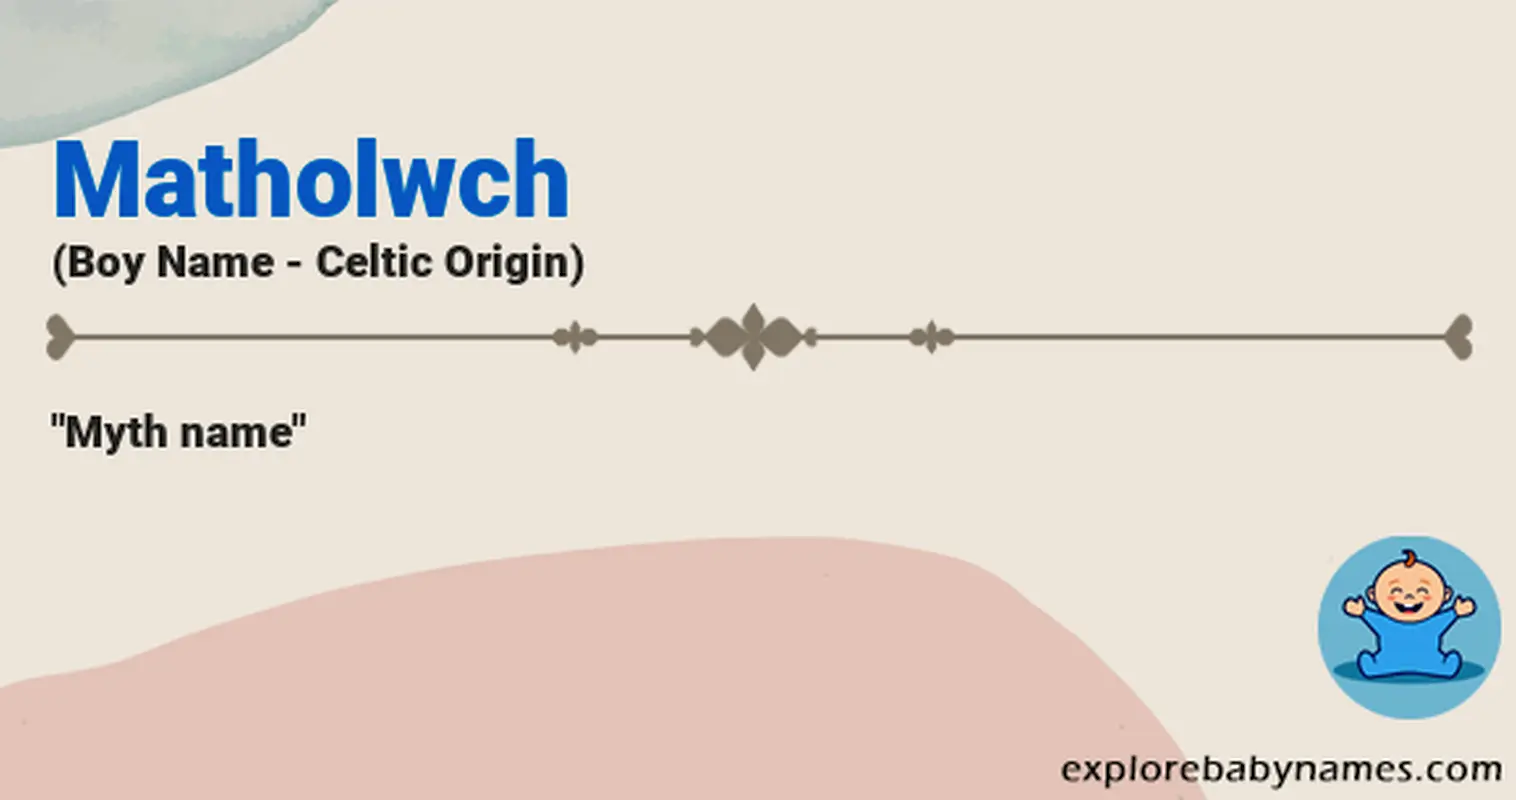 Meaning of Matholwch